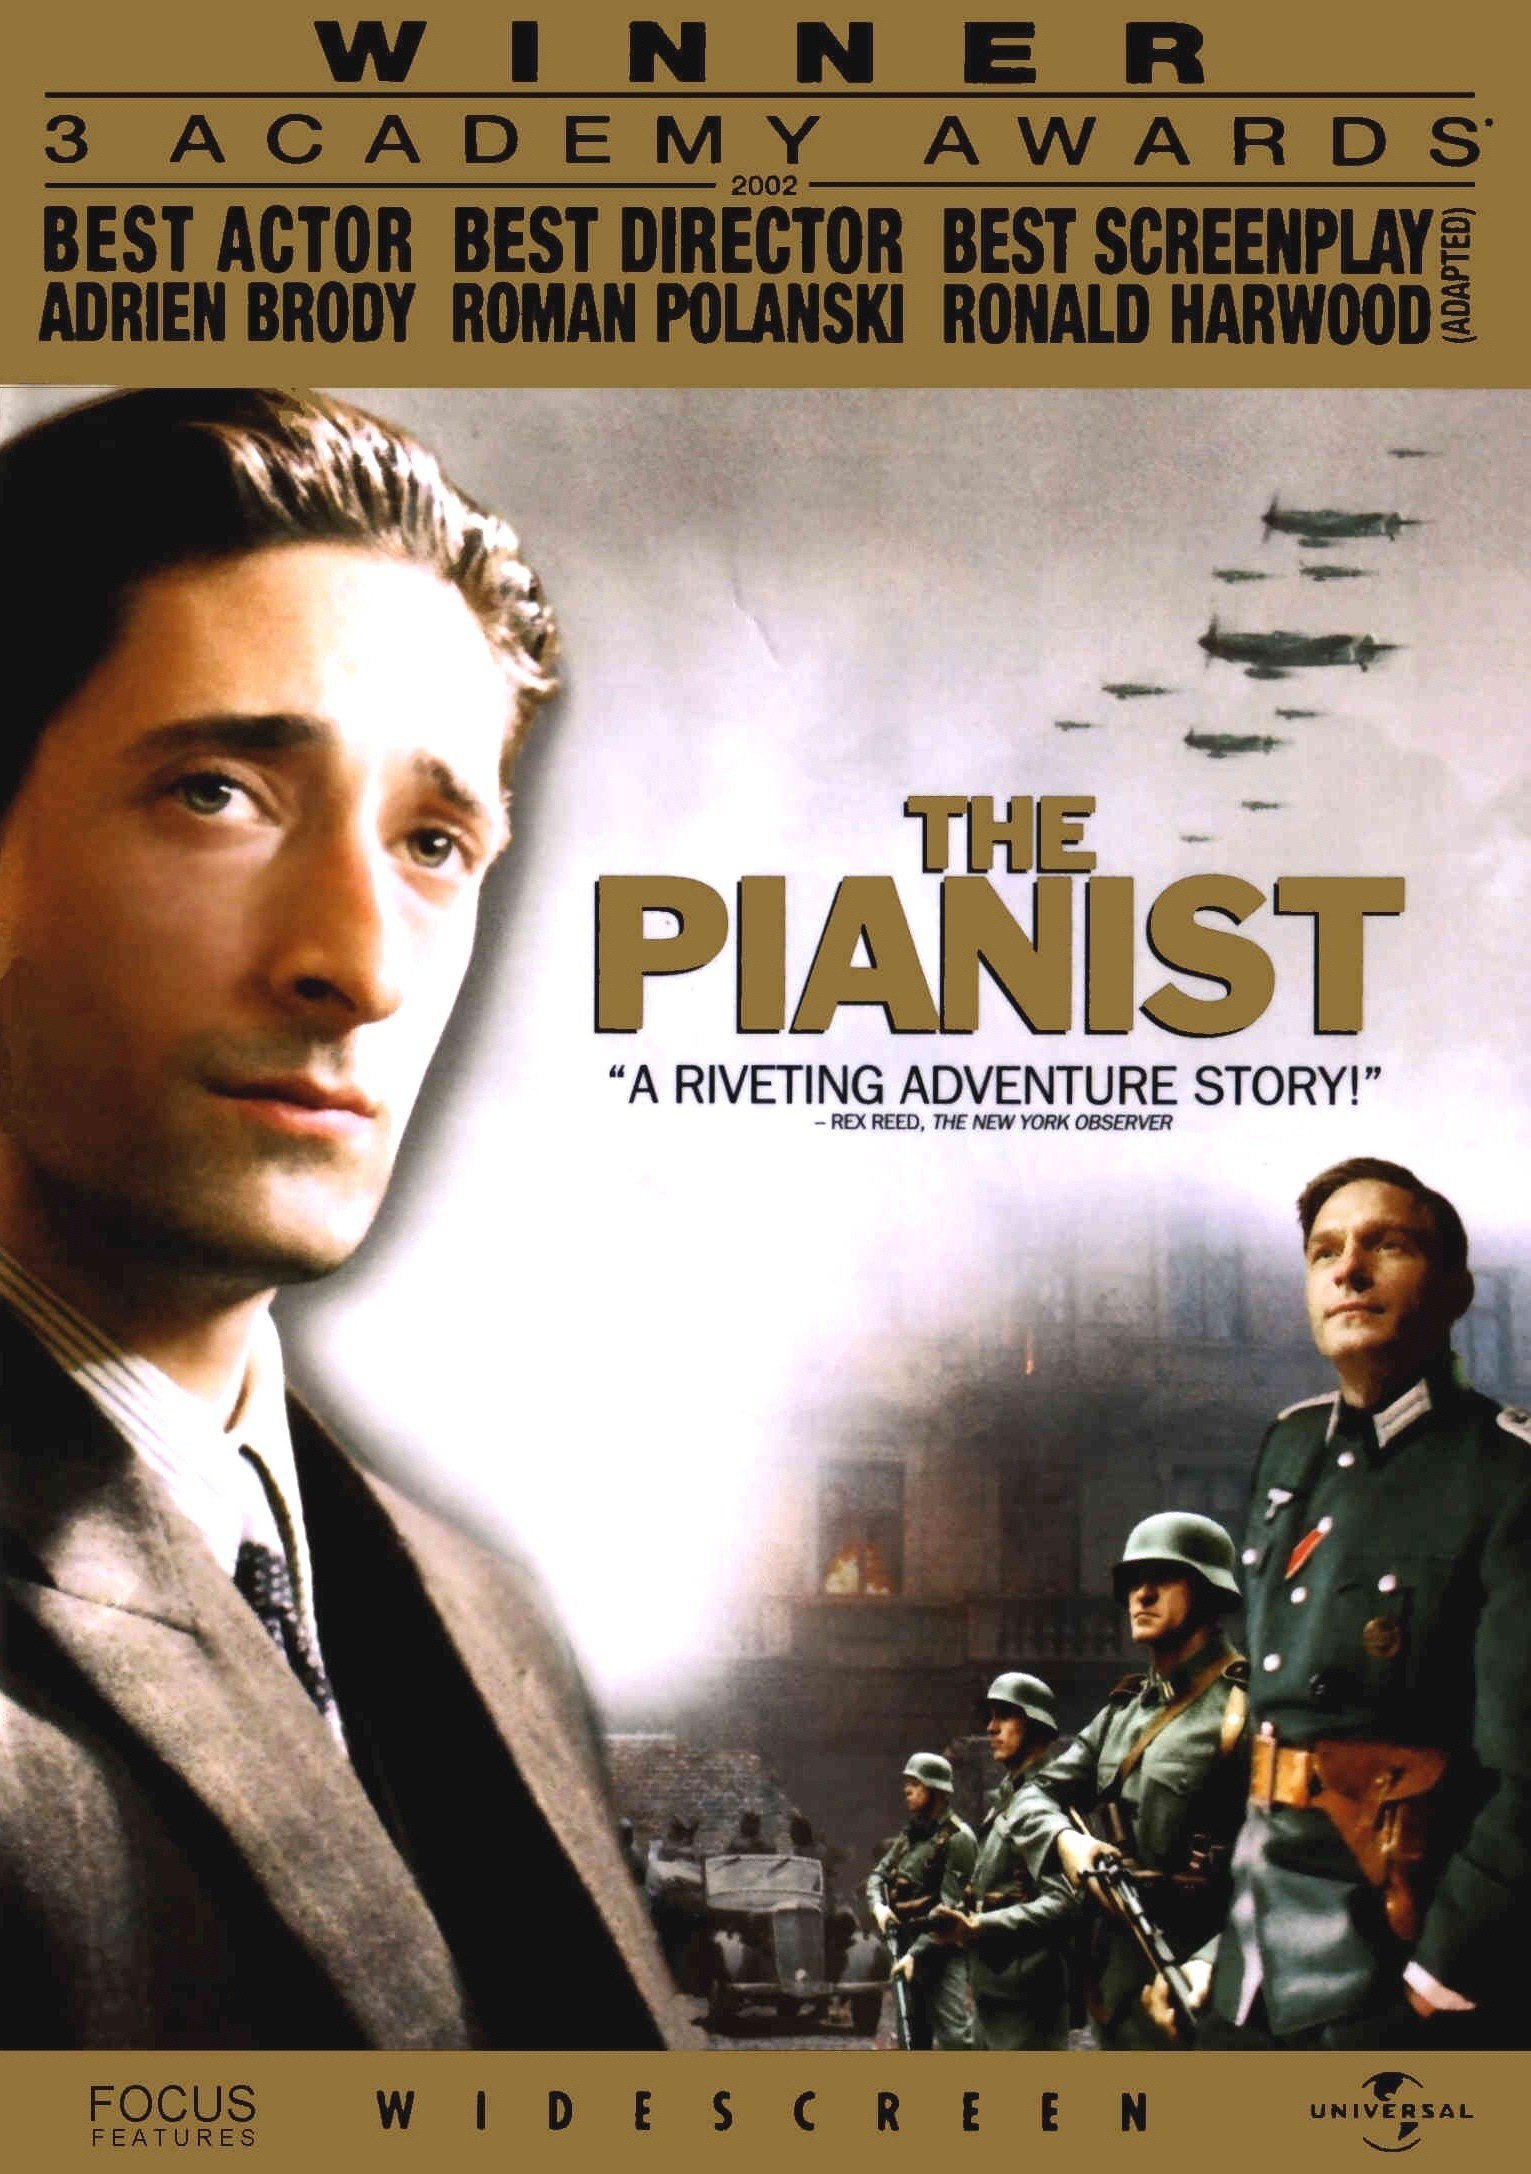 The pianist (2002)